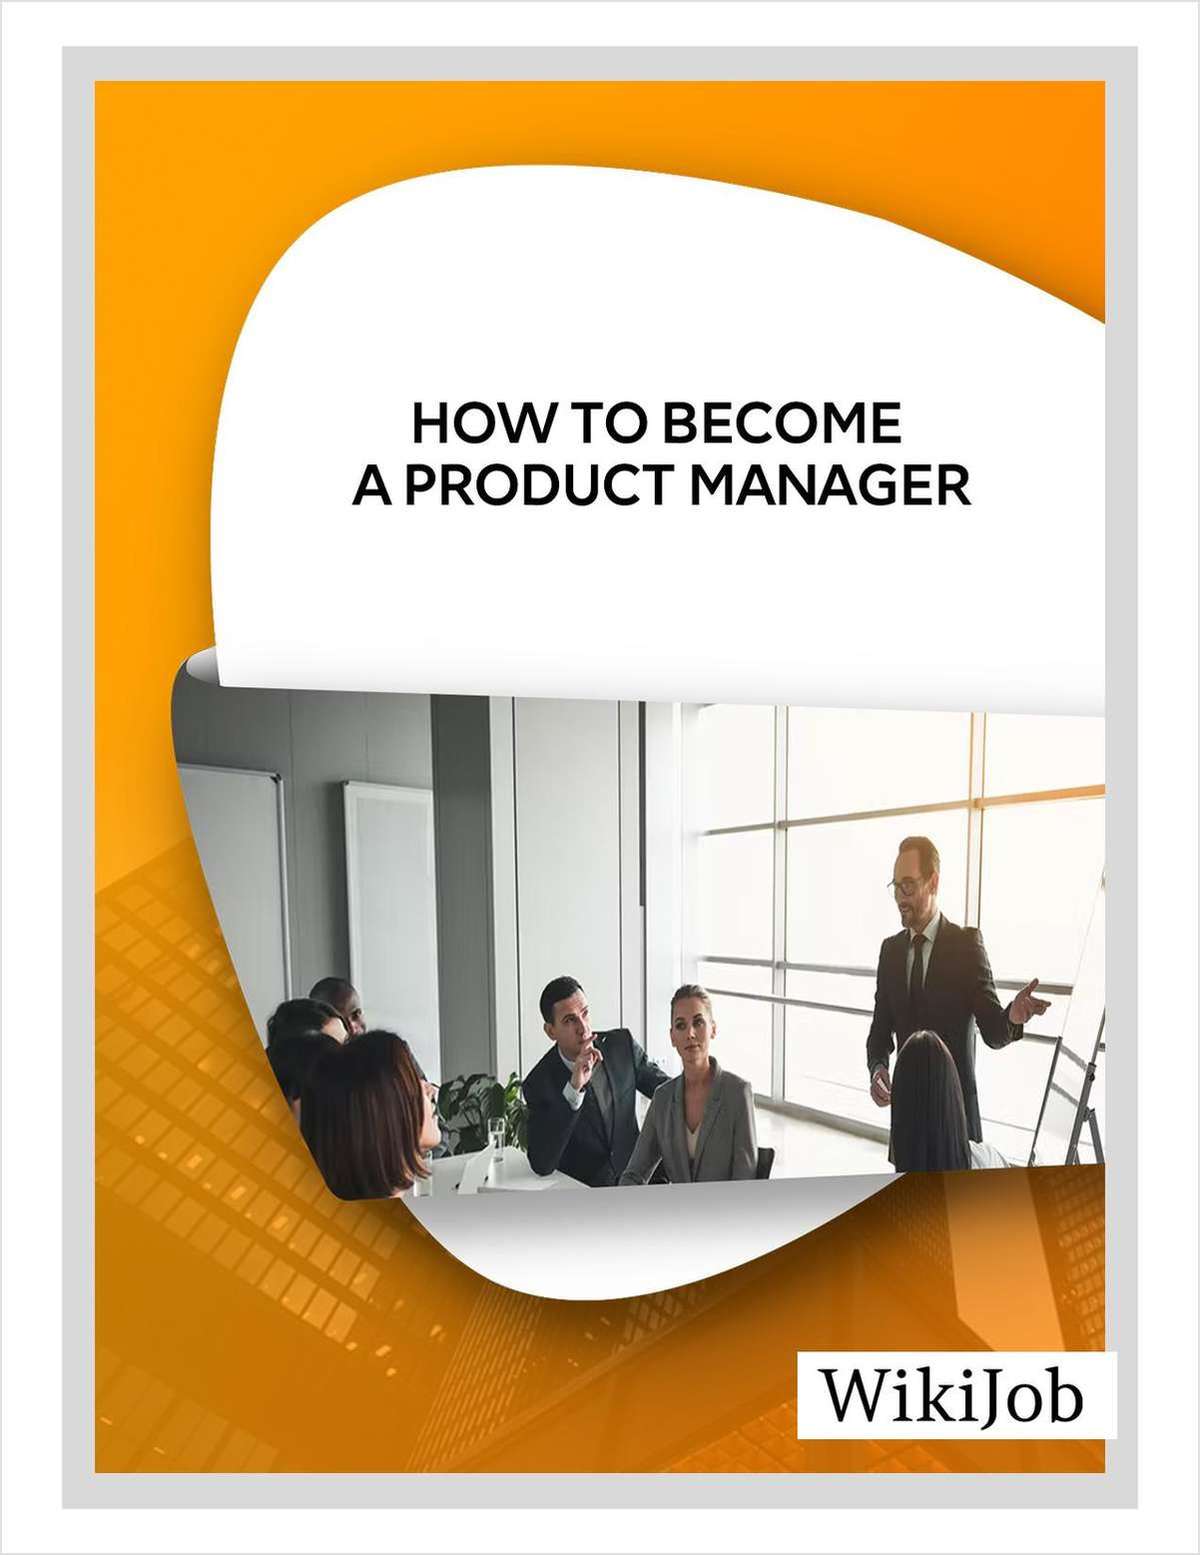 How to Become a Product Manager